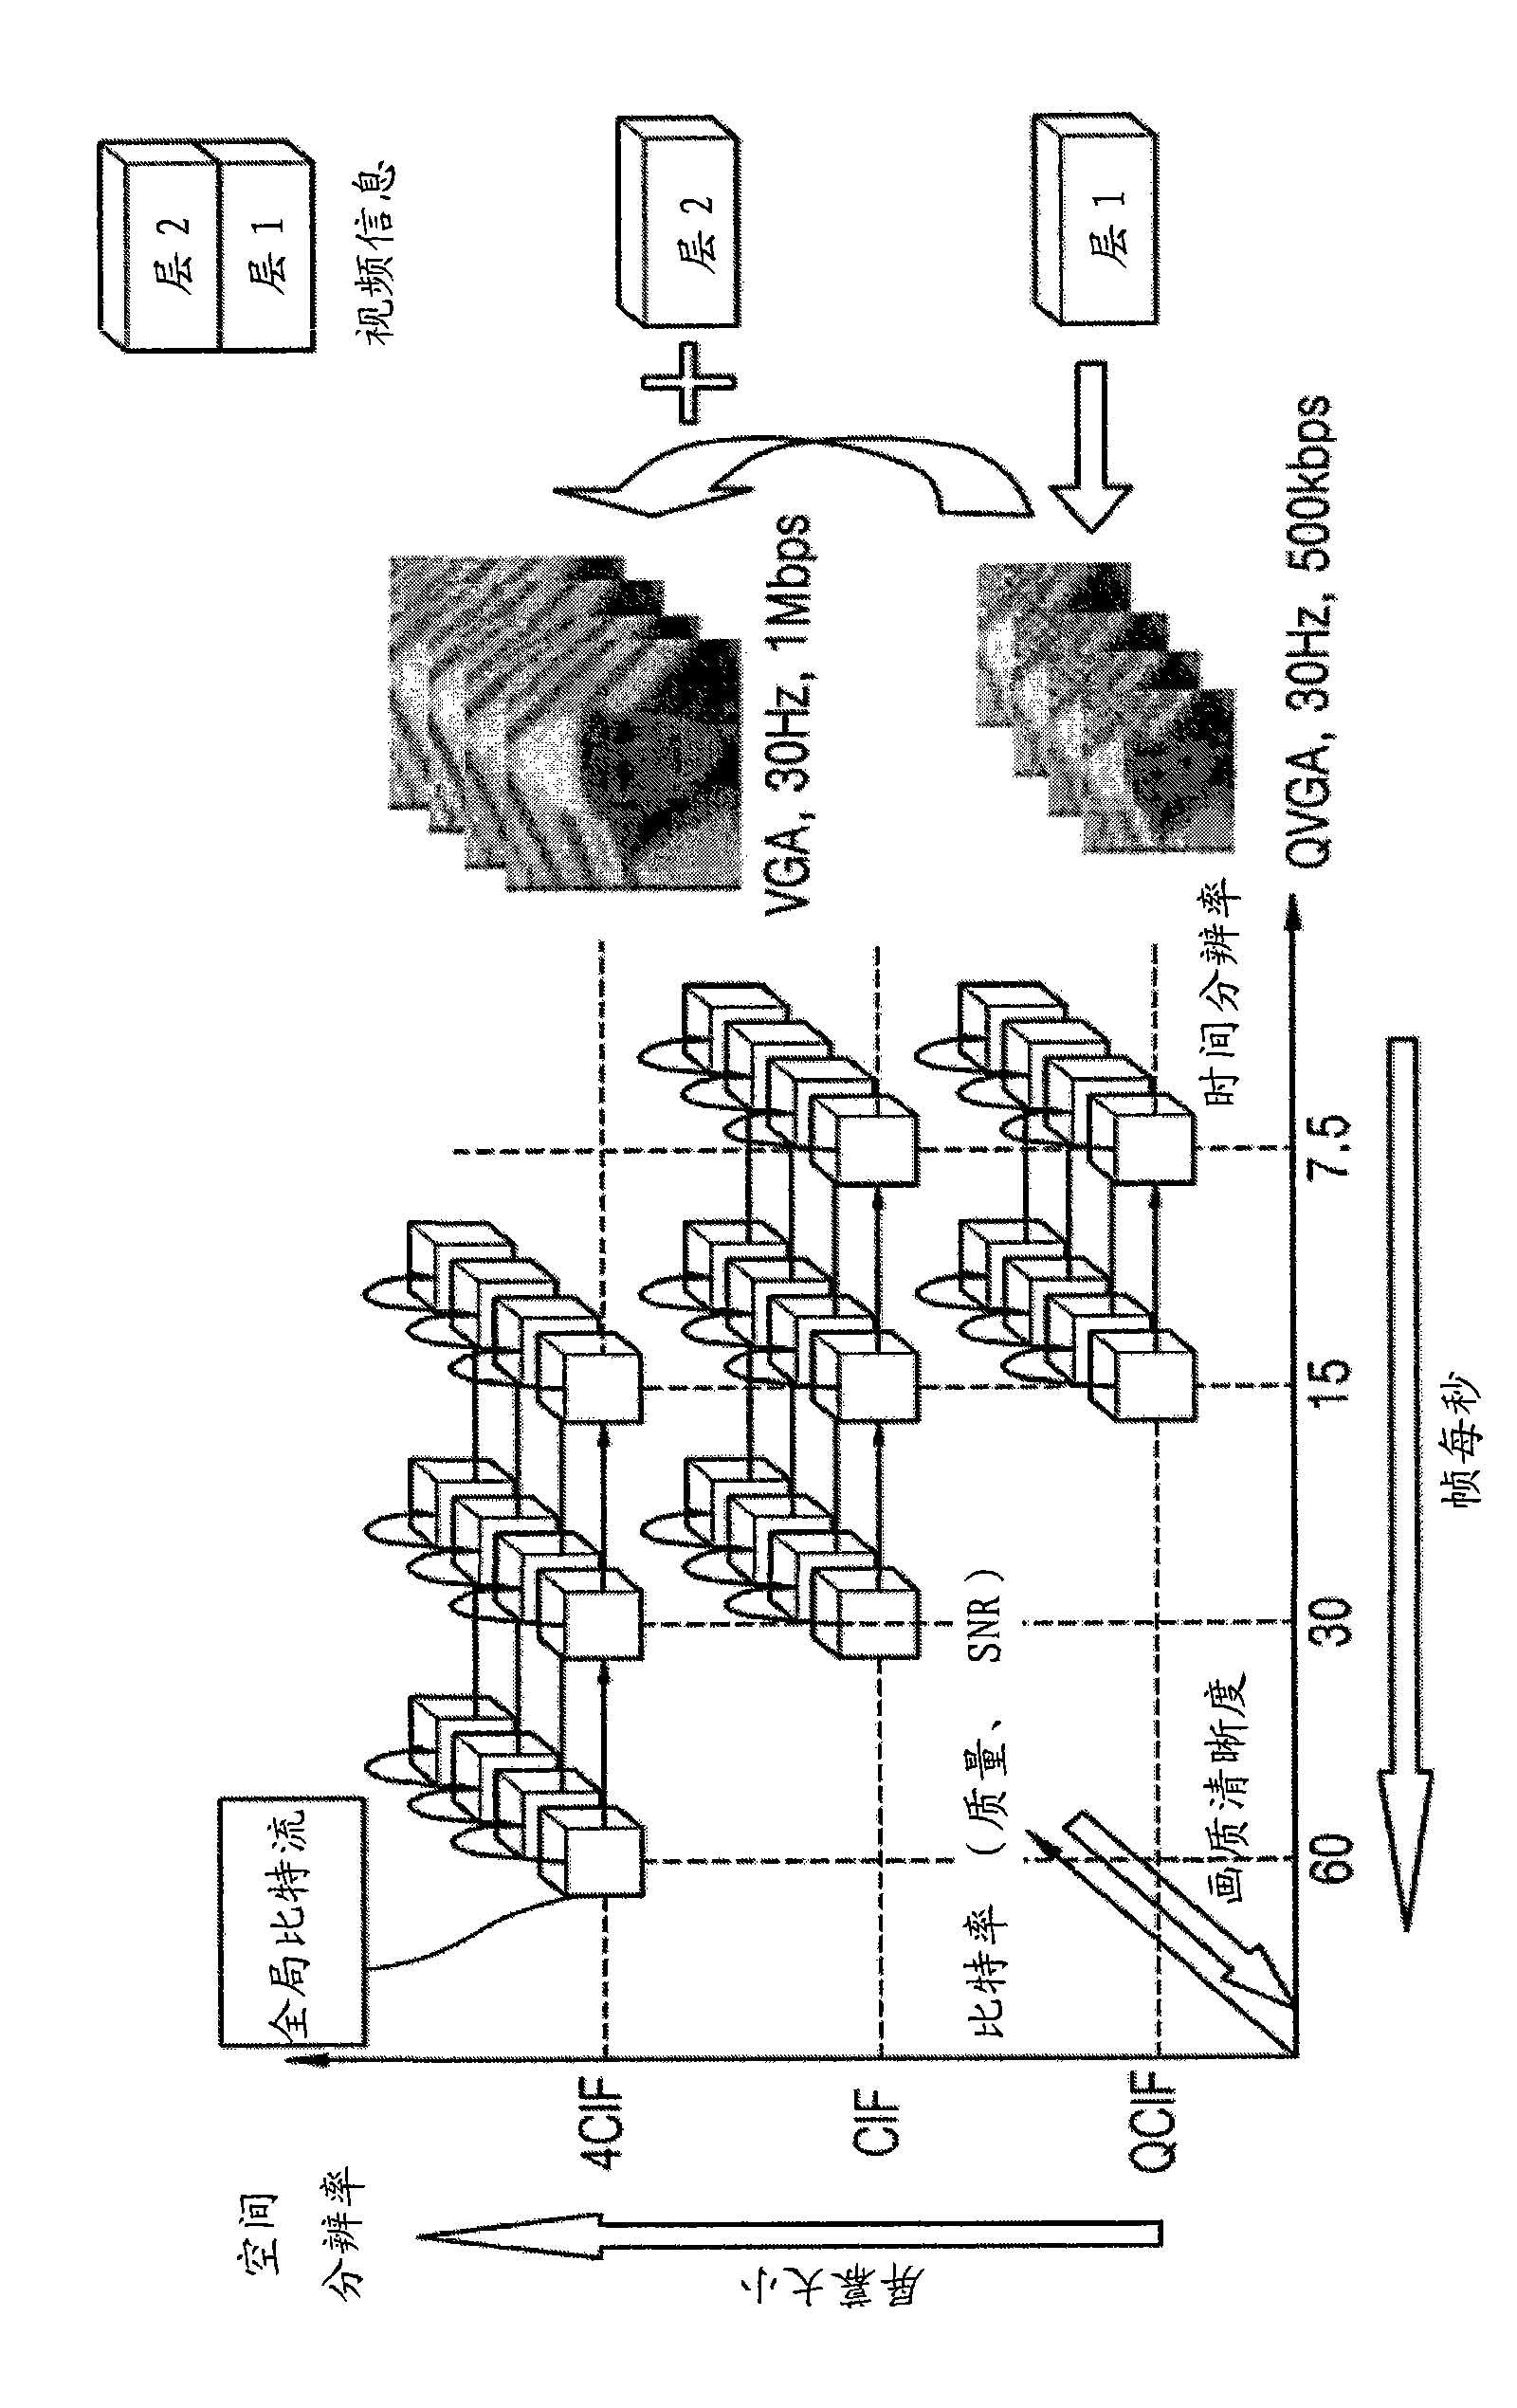 Apparatus and method for hierarchical modulation transmission and reception of scalable video bitstream